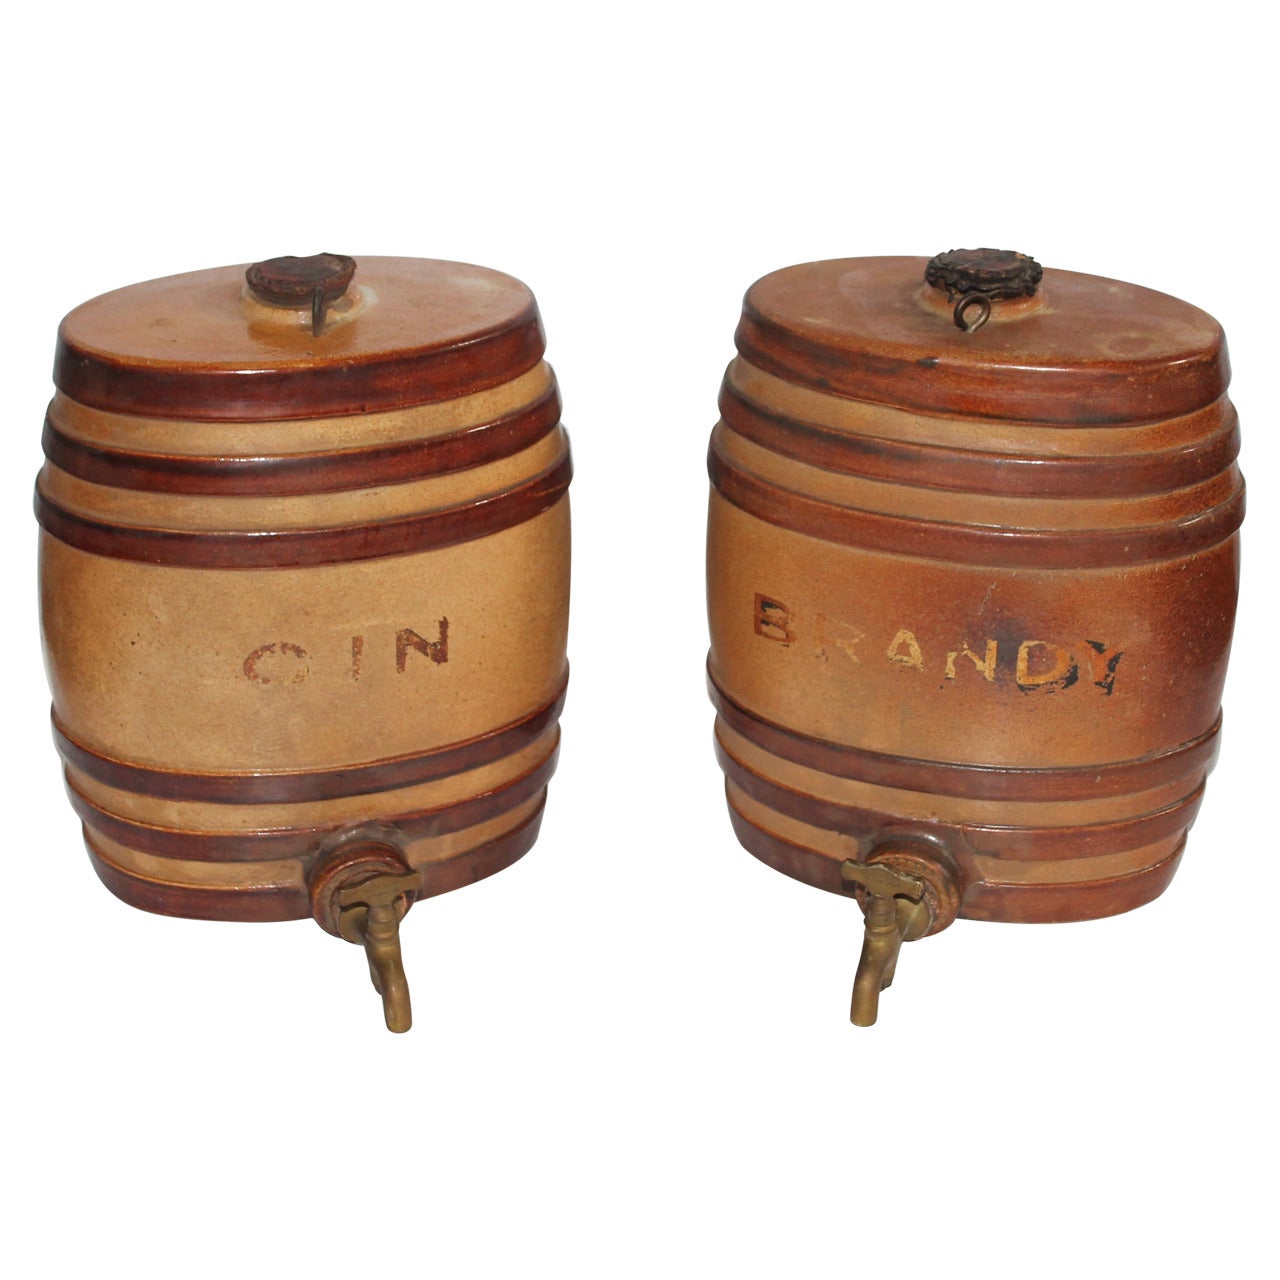 Pair of 19th Century Pottery Gin and Brandy Kegs with Original Brass Spigot